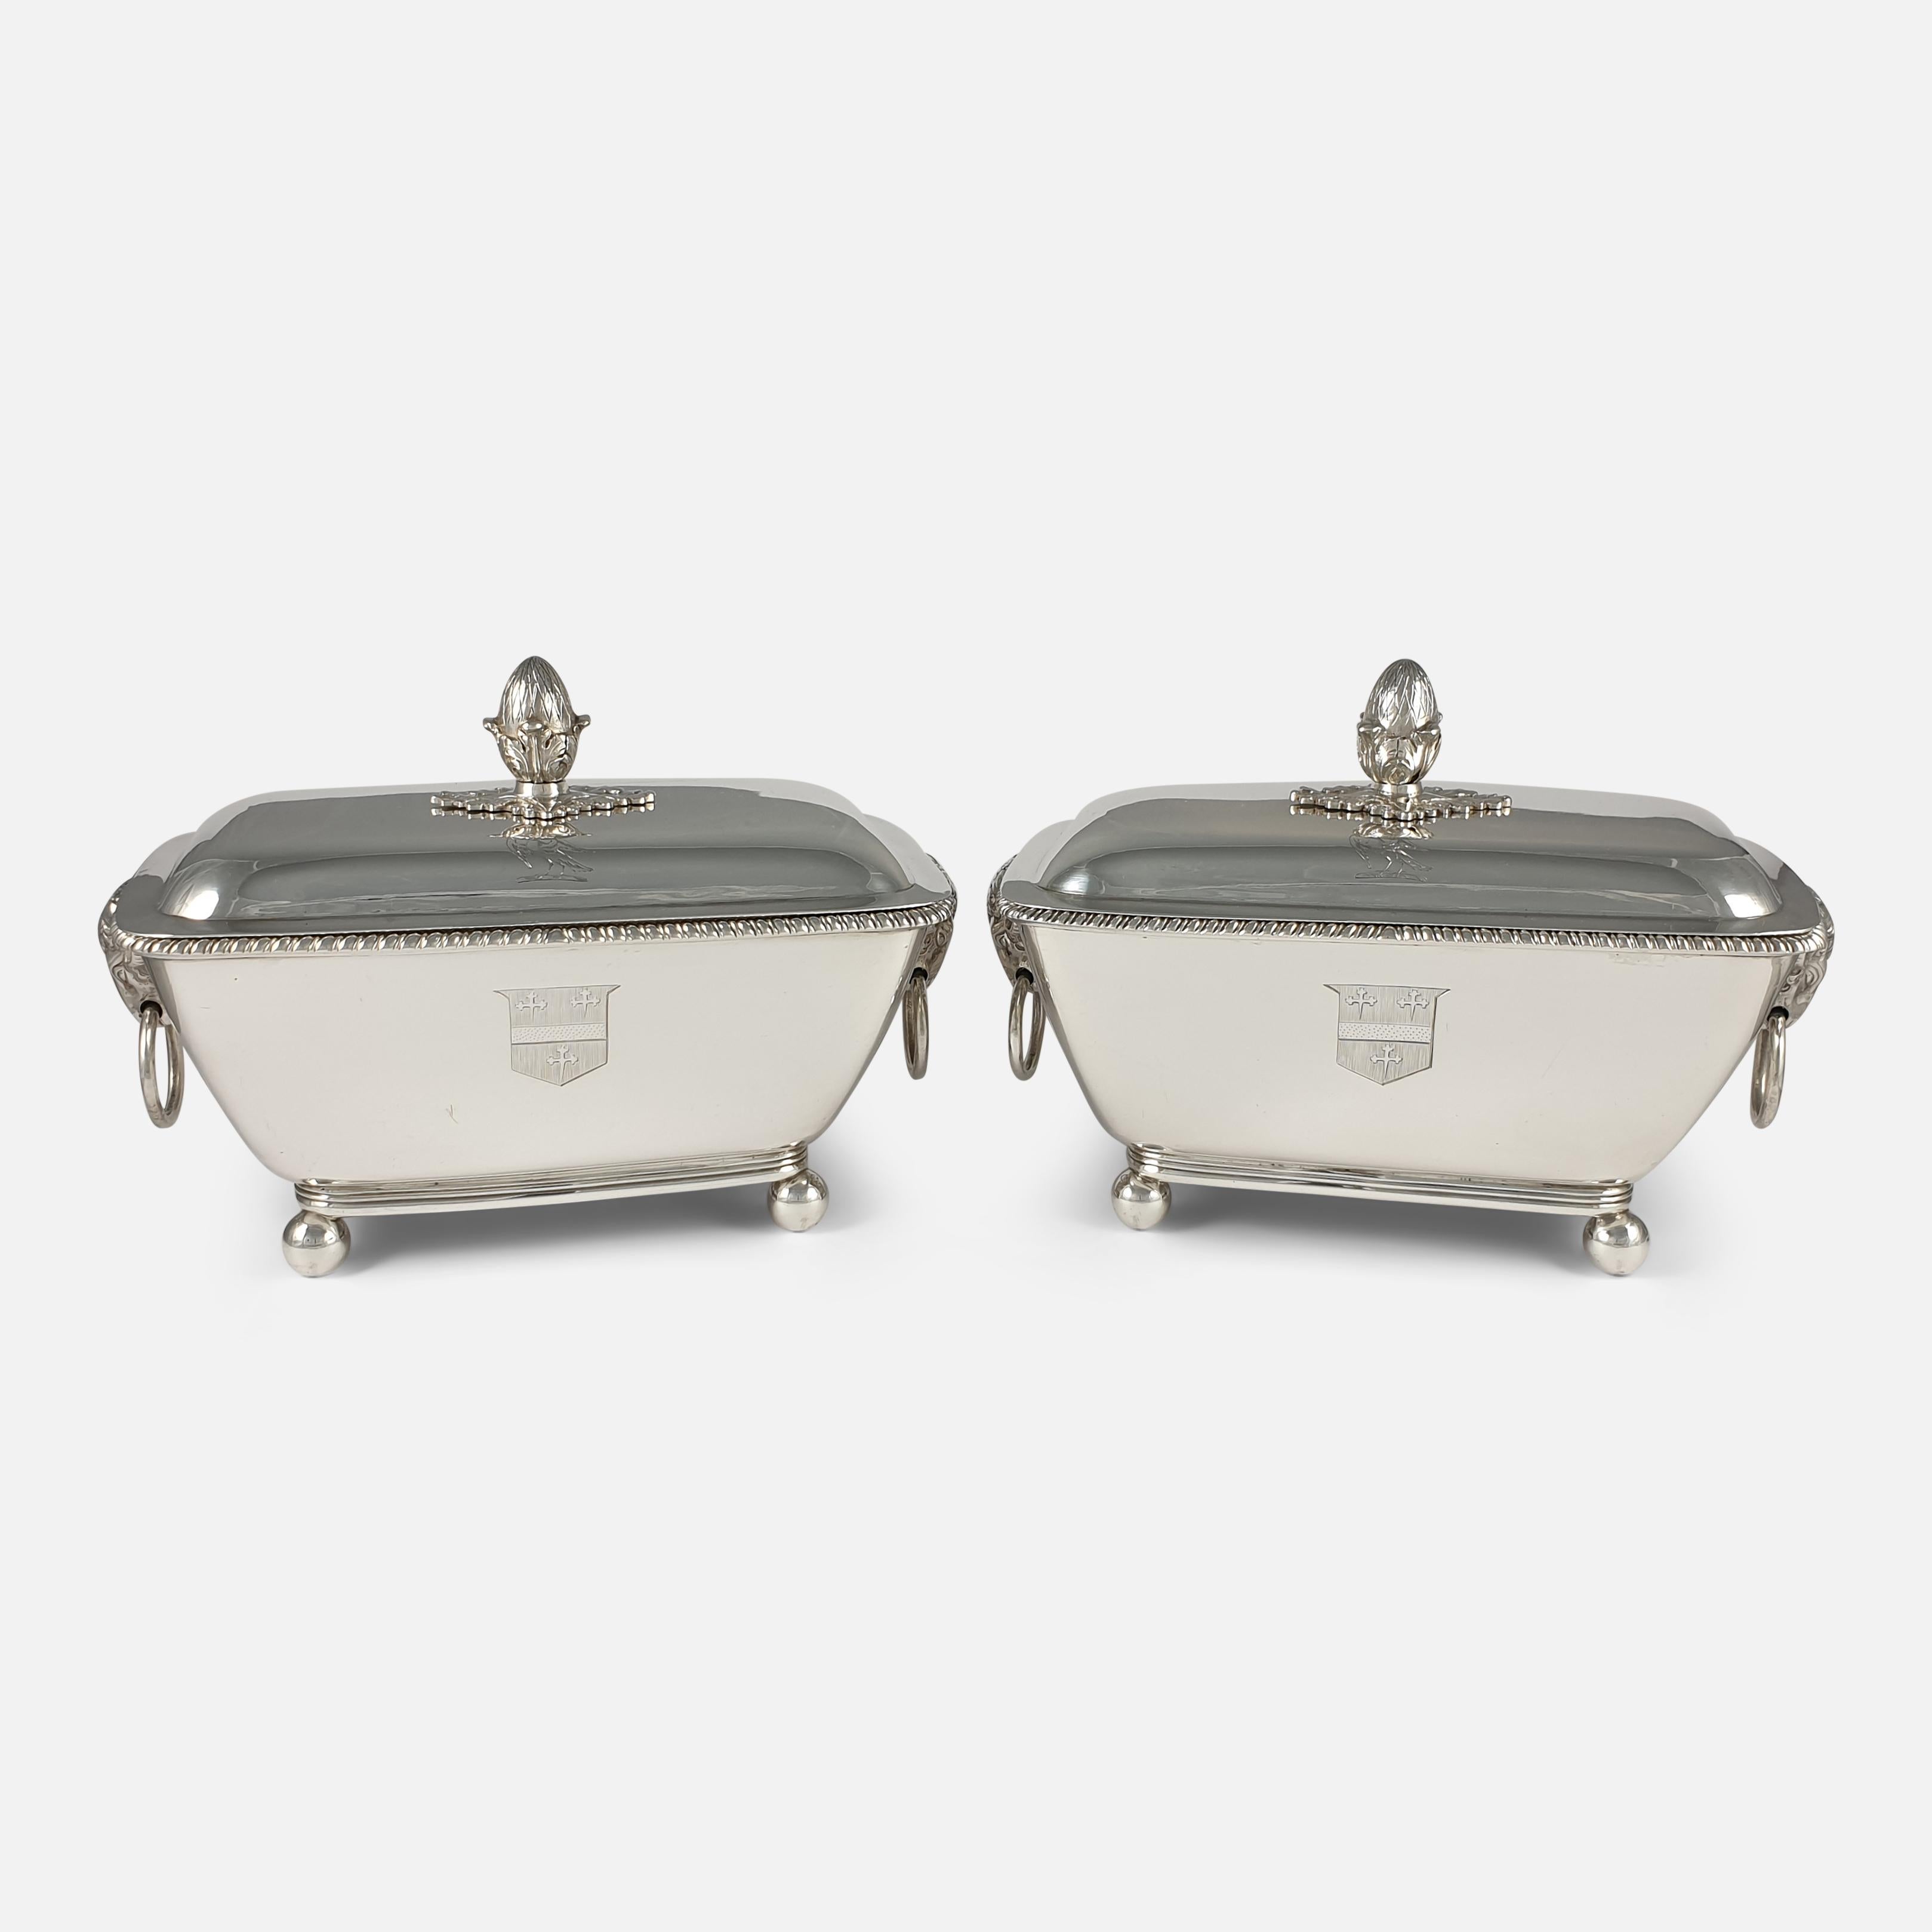 Pair of George III Silver Sauce Tureens and Covers, John Robins, London, 1802 For Sale 11